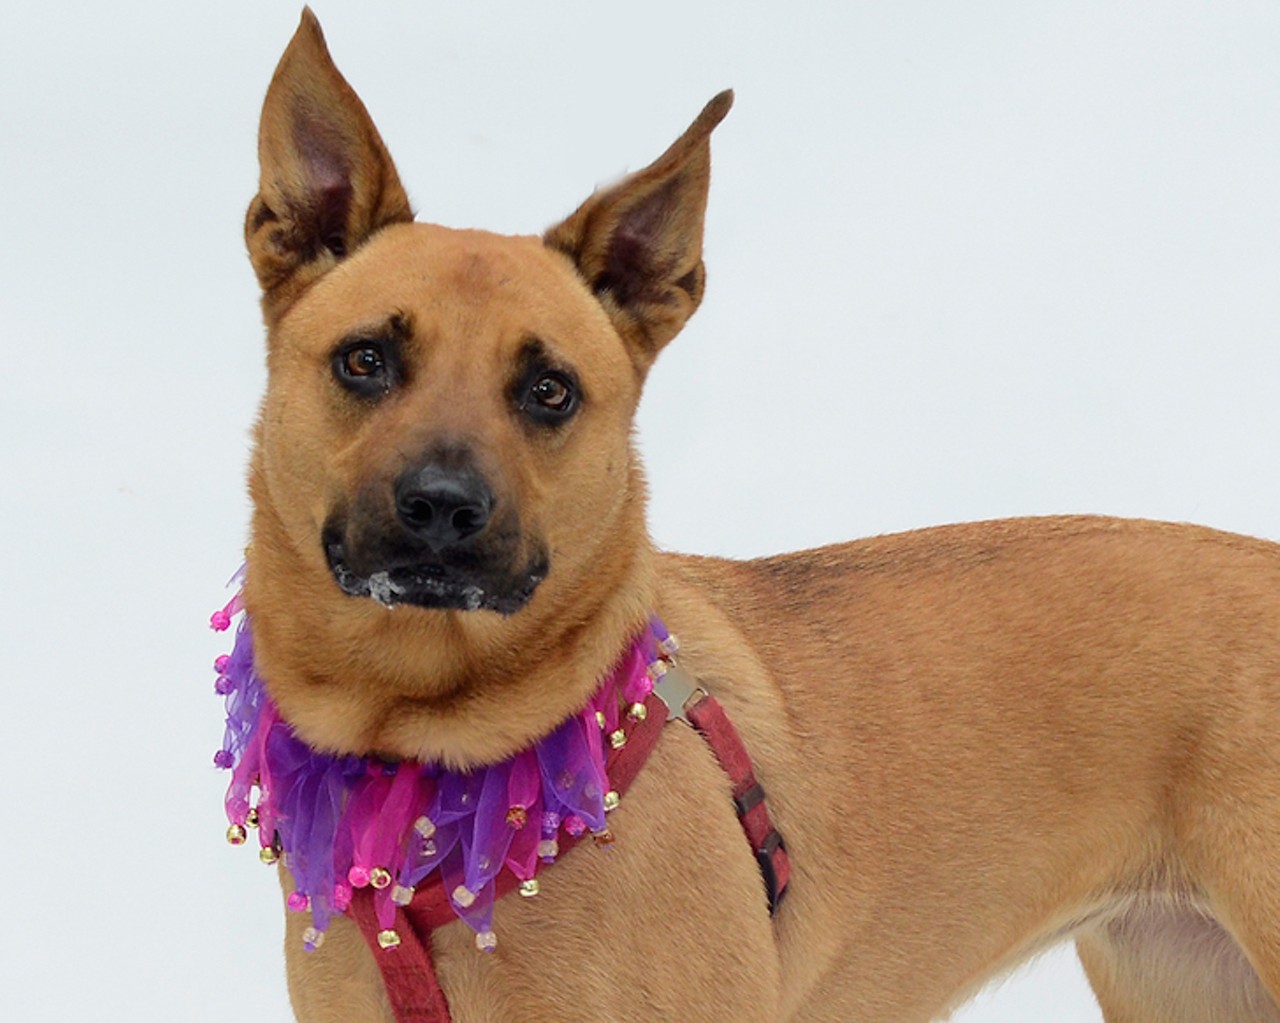 17 adoptable dogs looking for a new human this spring